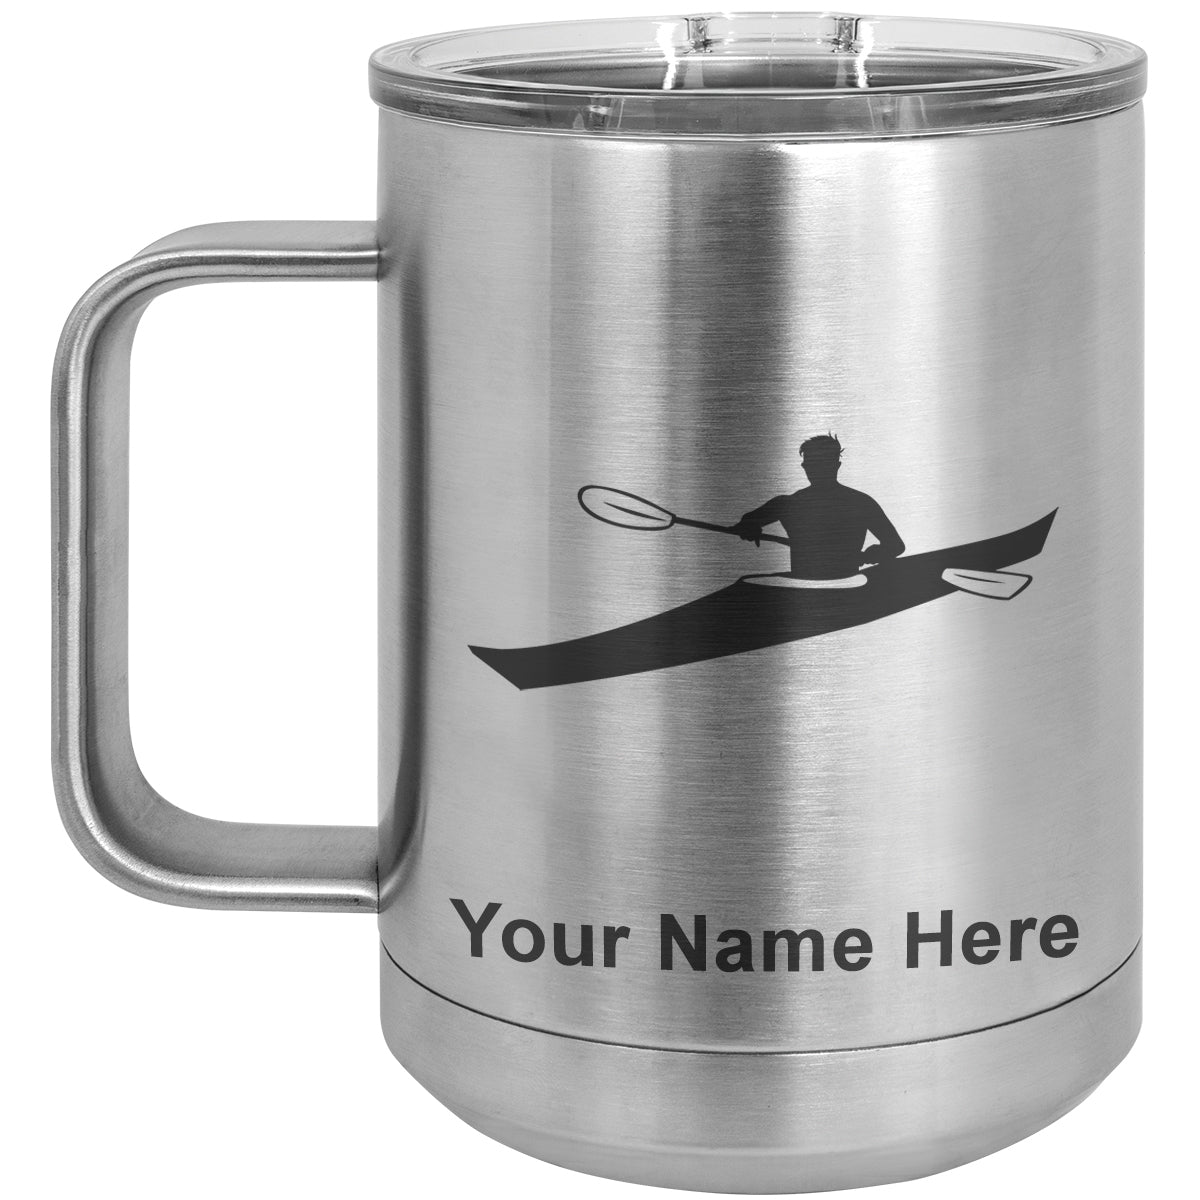 15oz Vacuum Insulated Coffee Mug, Kayak Man, Personalized Engraving Included